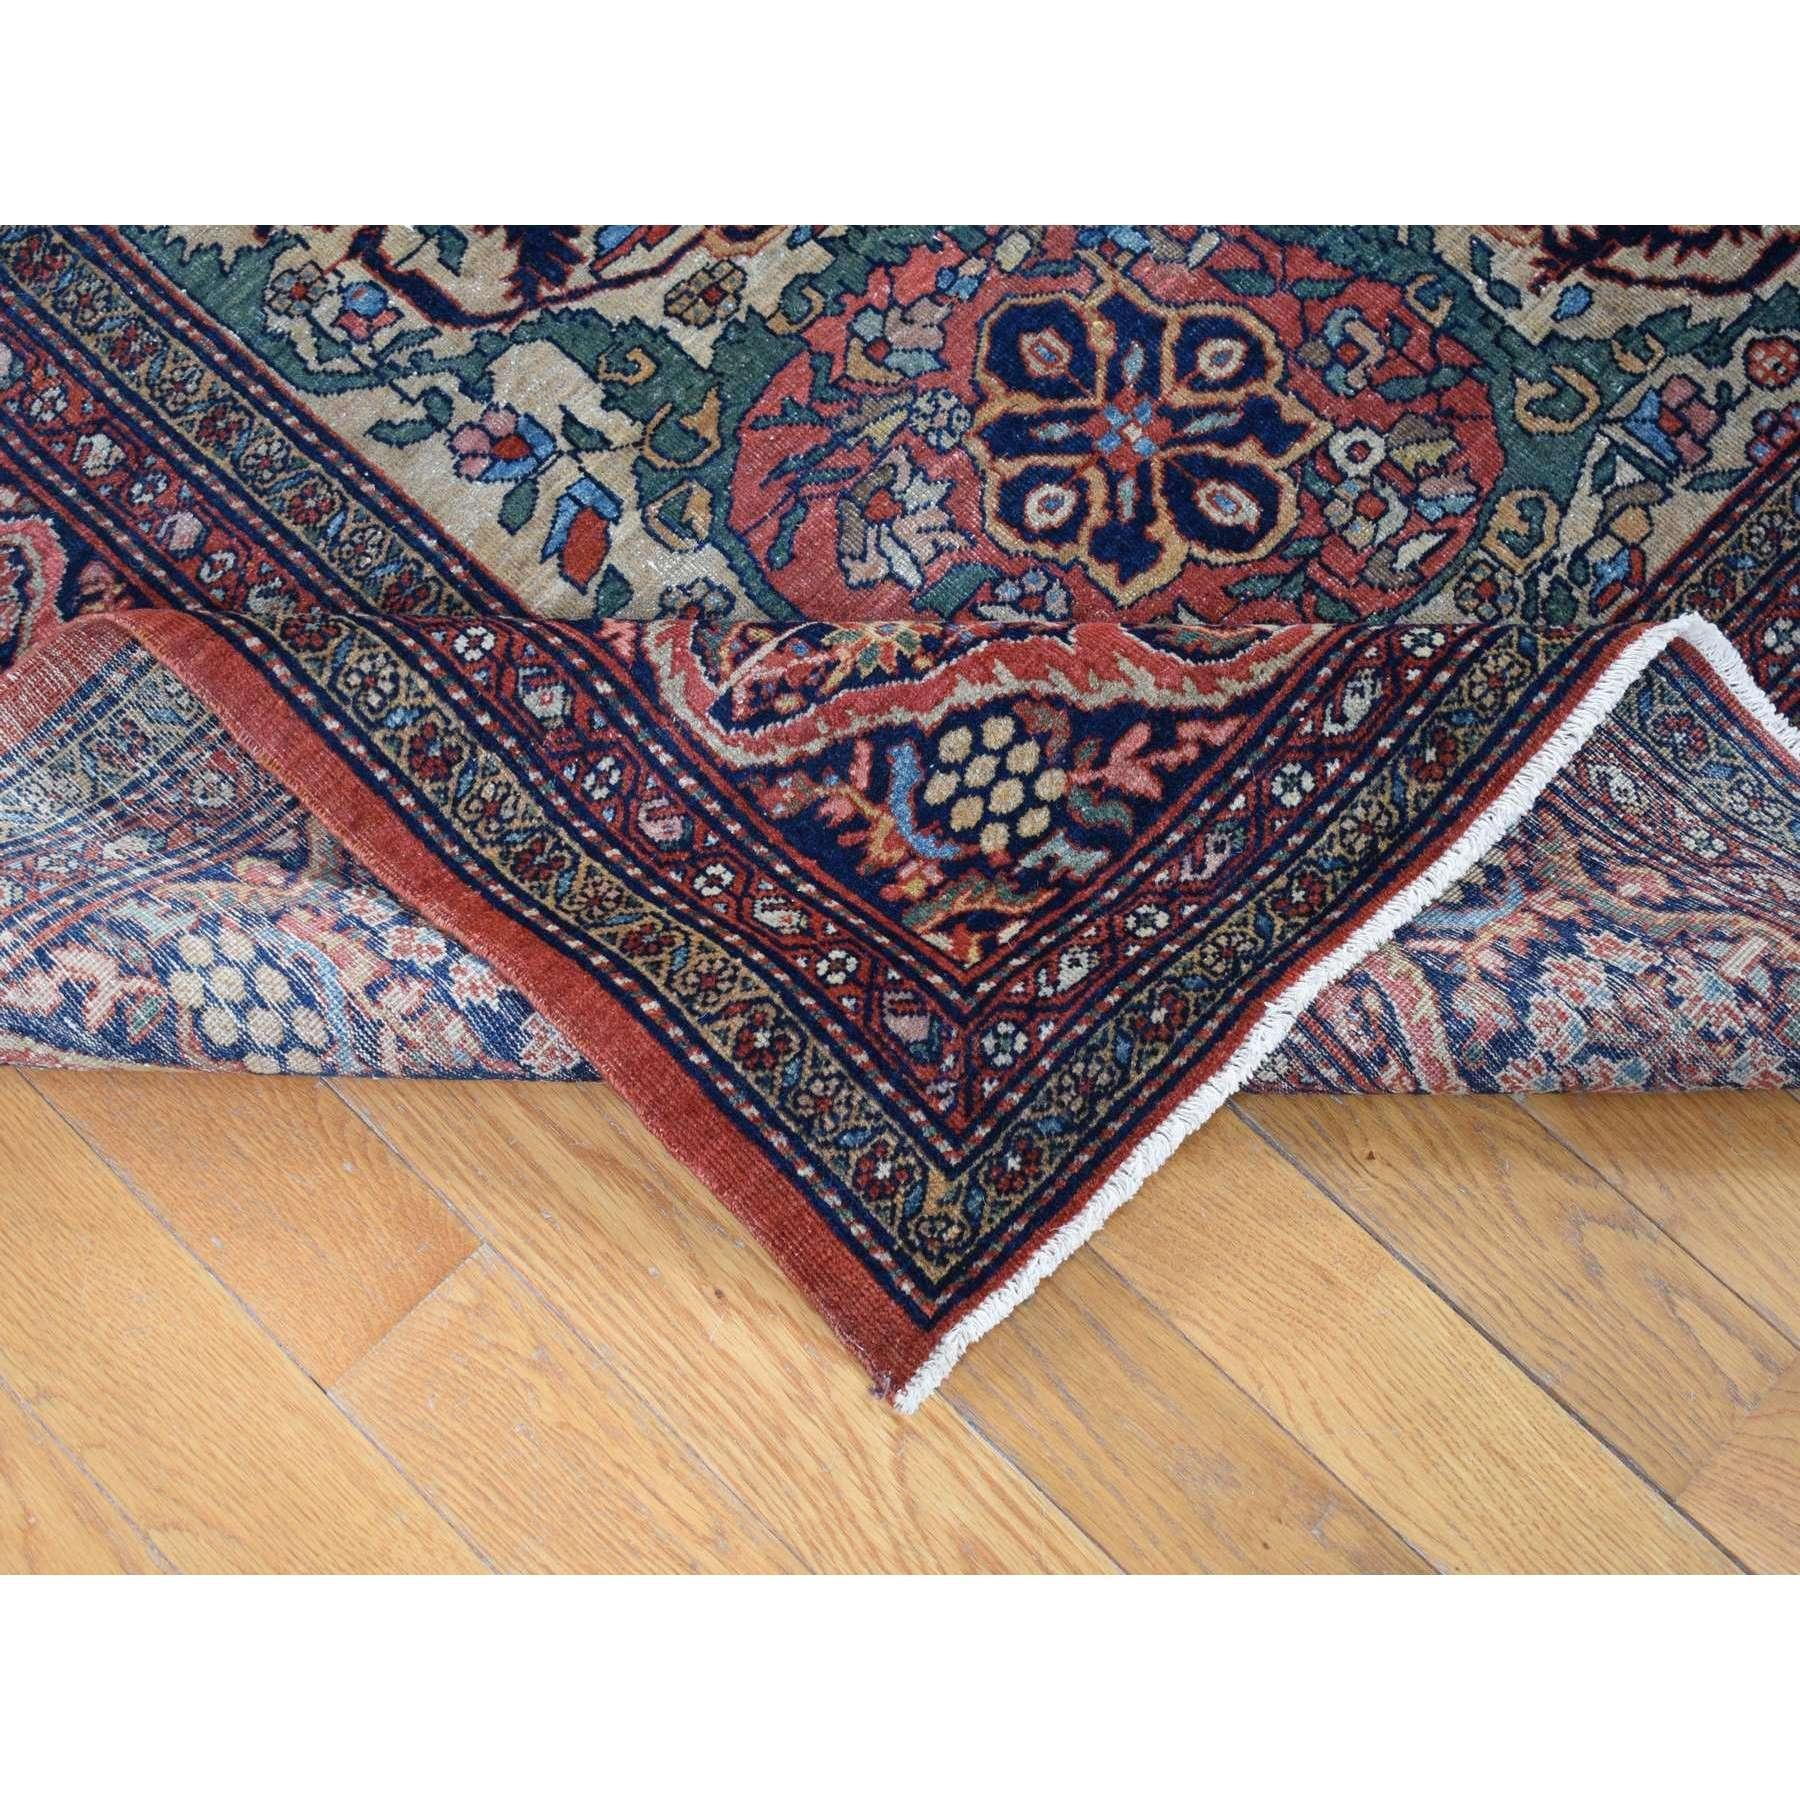 Early 20th Century Barn Red Antique Persian Feraghan Sarouk Evenly Worn Hand Knotted Wool Clean Rug For Sale